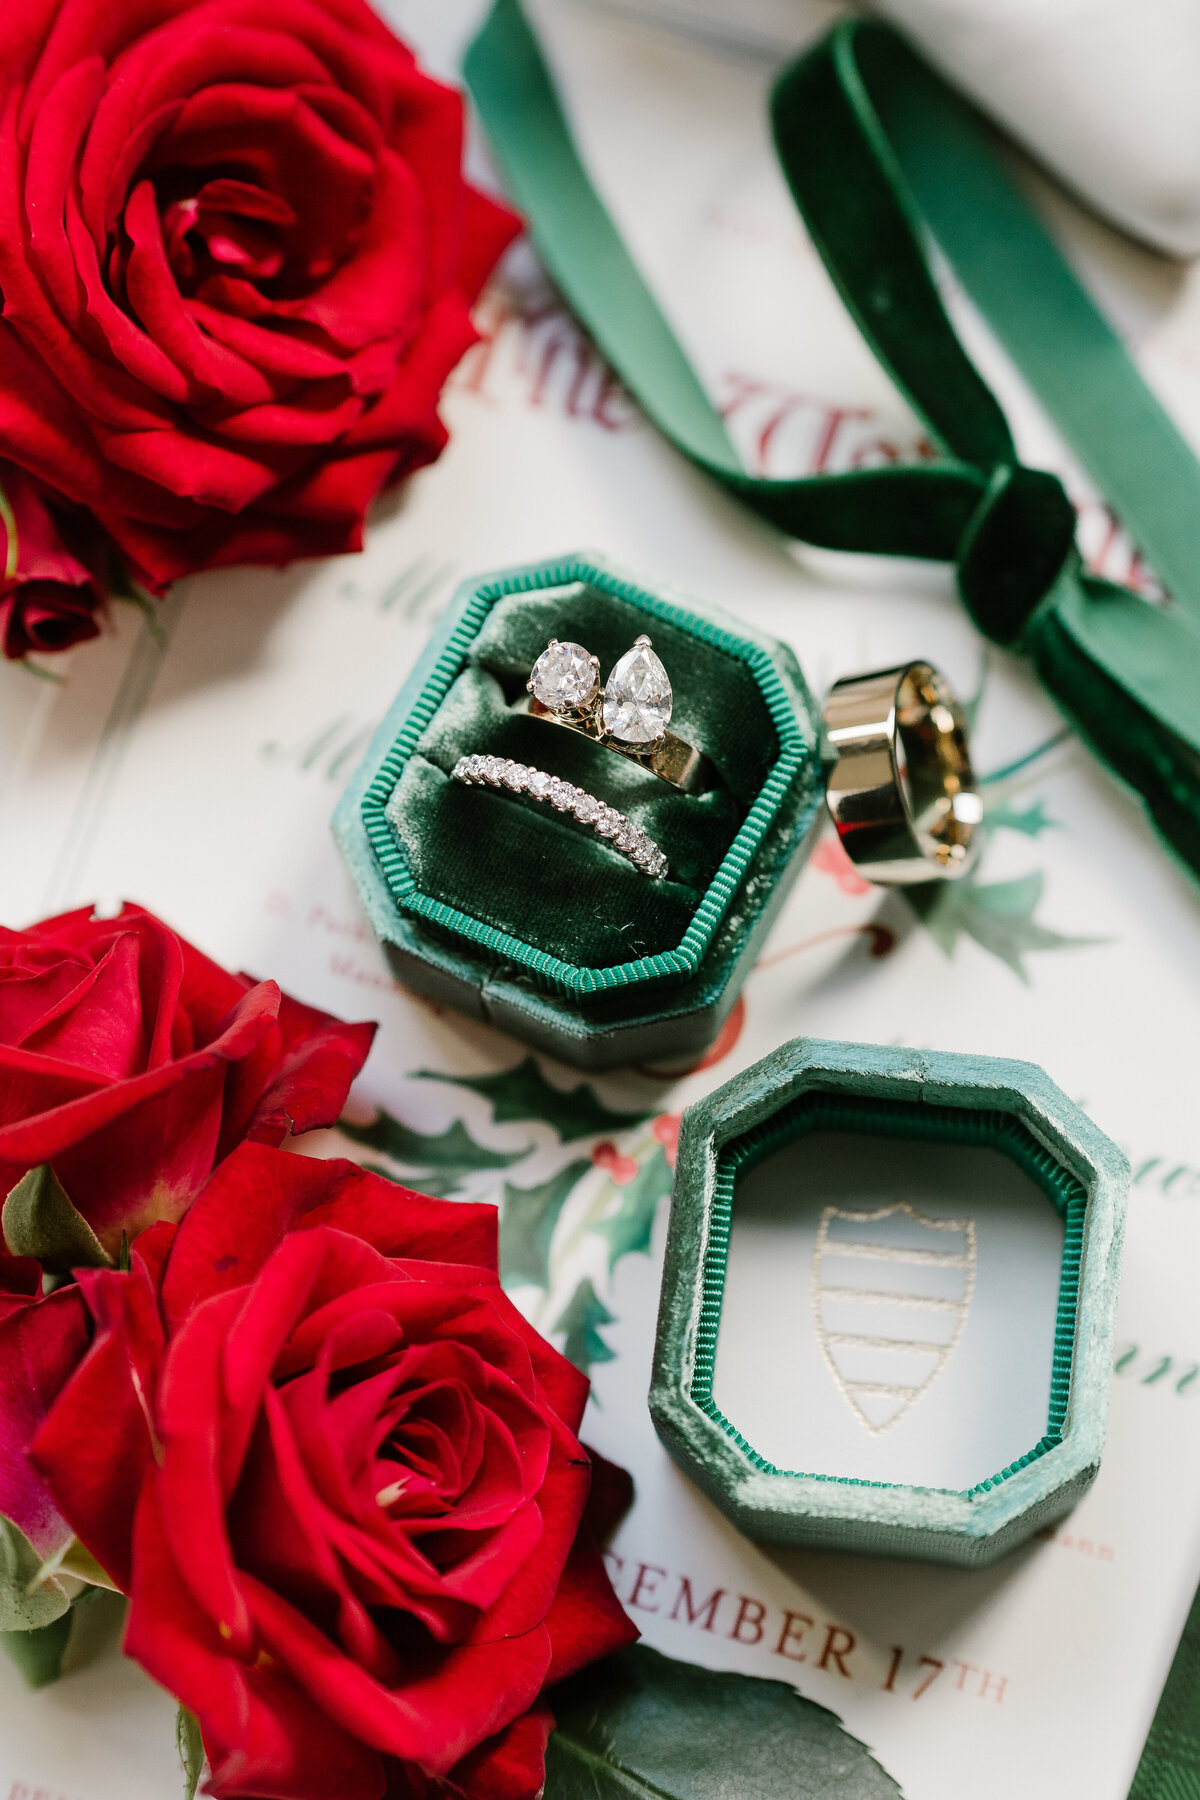 Bride's Wedding ring and roses